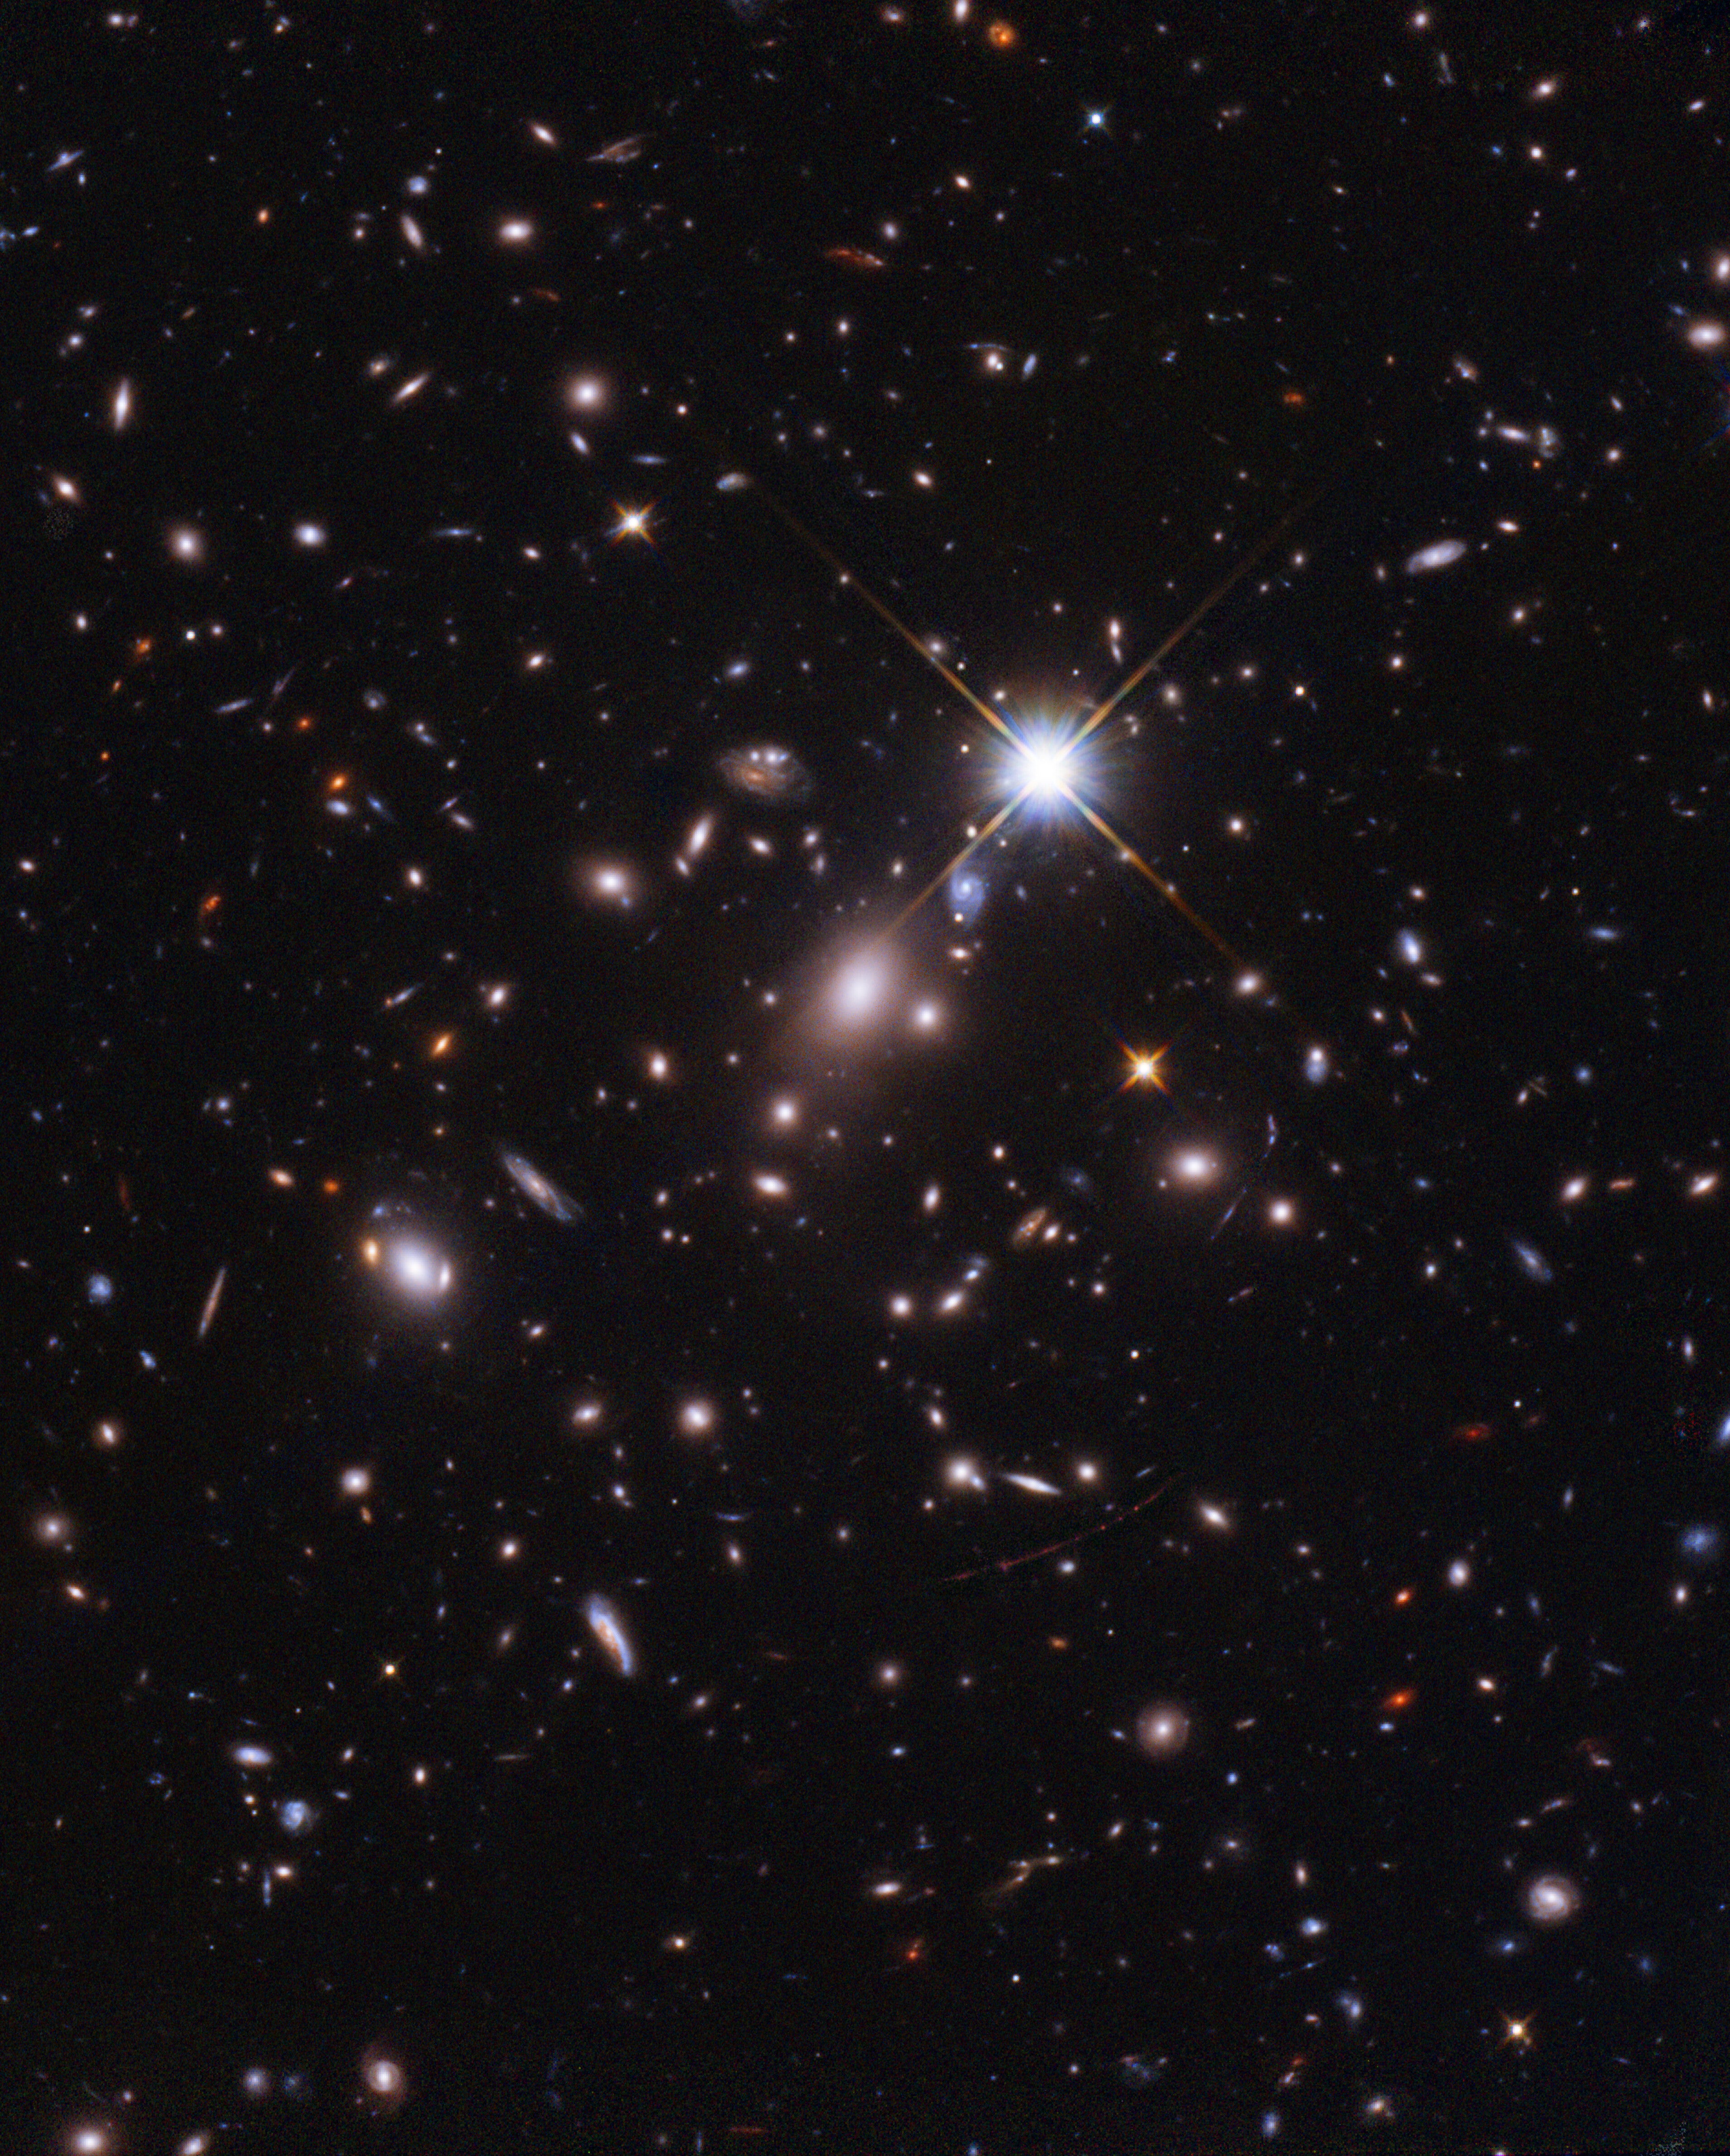 A Hubble image of distant stars